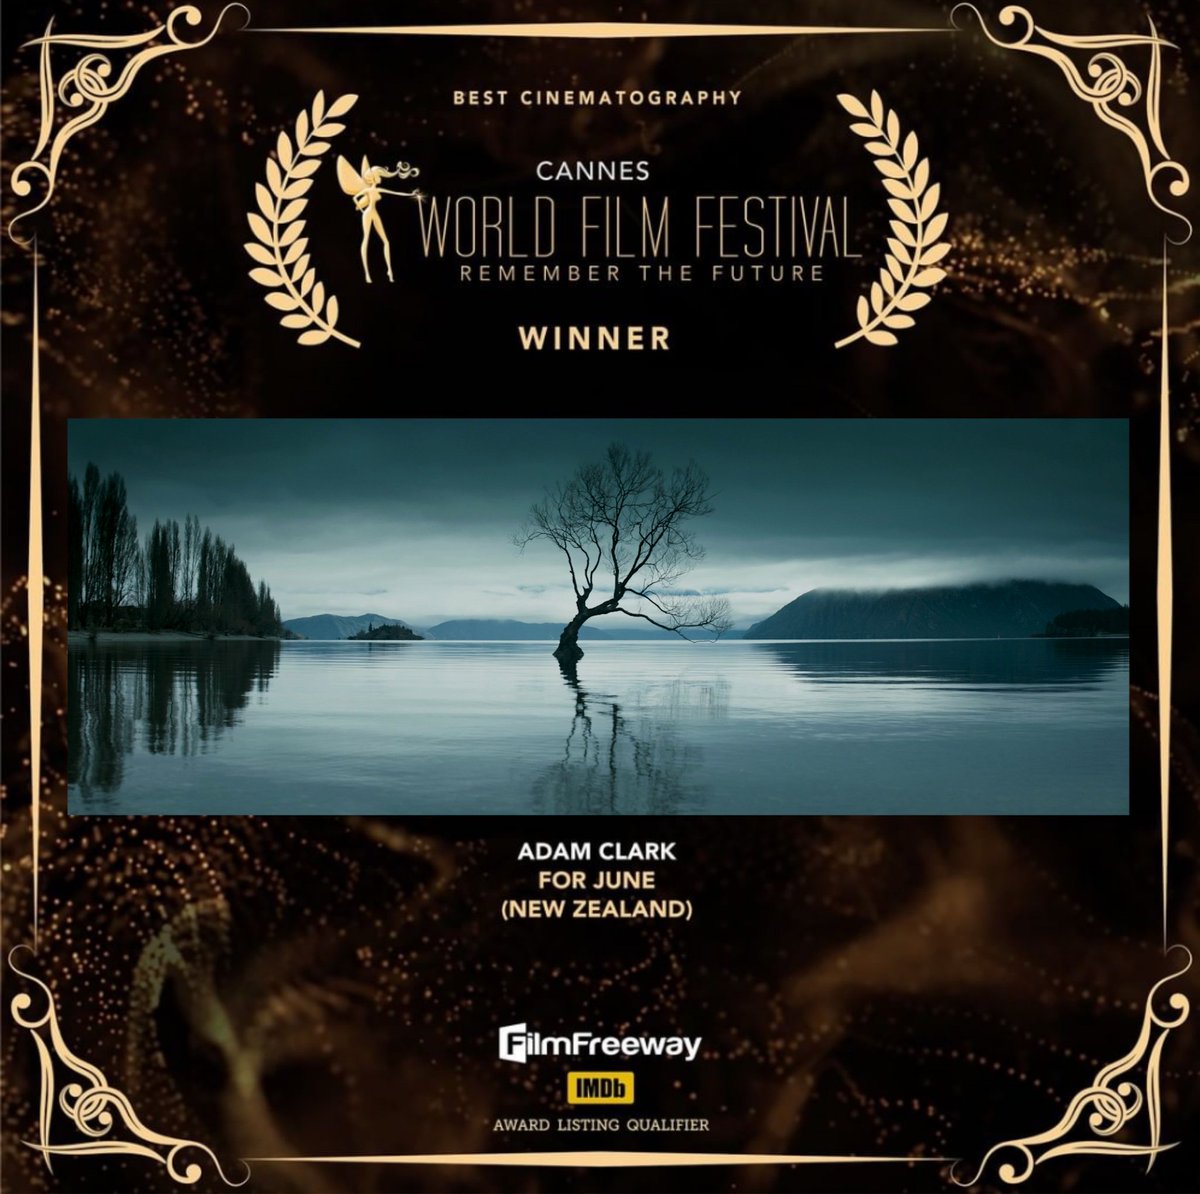 PROUD to announce June is the WINNER of BEST CINEMATOGRAPHY at the CANNES WORLD FILM FESTIVAL❤️🇫🇷❤️

Congratulations ADAM CLARK 🎥🏆🎬

#juneshortfilm #nzfilm #cannes #cannes2023 #cannesfilmfestival #cannesworldfilmfestival #scifi #filmmaking #filmfestivals